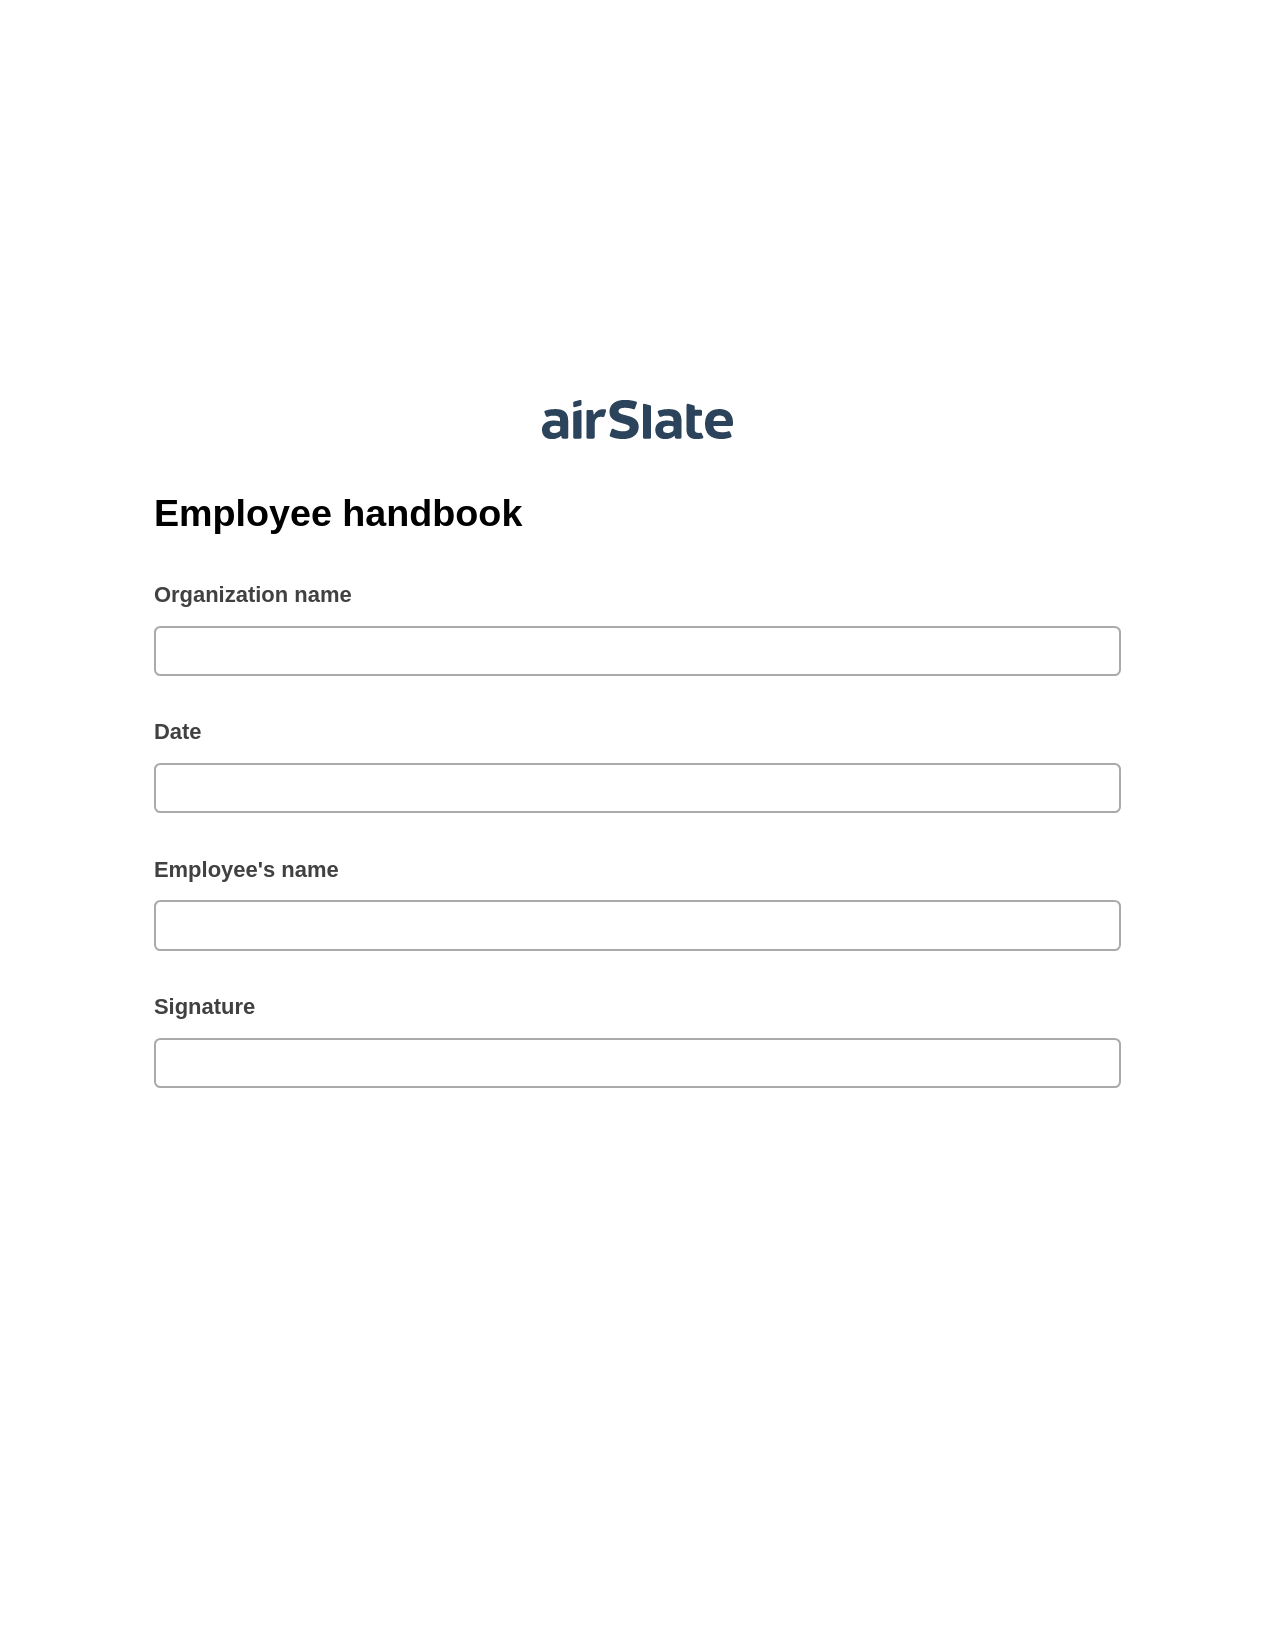 Employee handbook Pre-fill Dropdown from Airtable, Audit Trail Bot, Box Bot